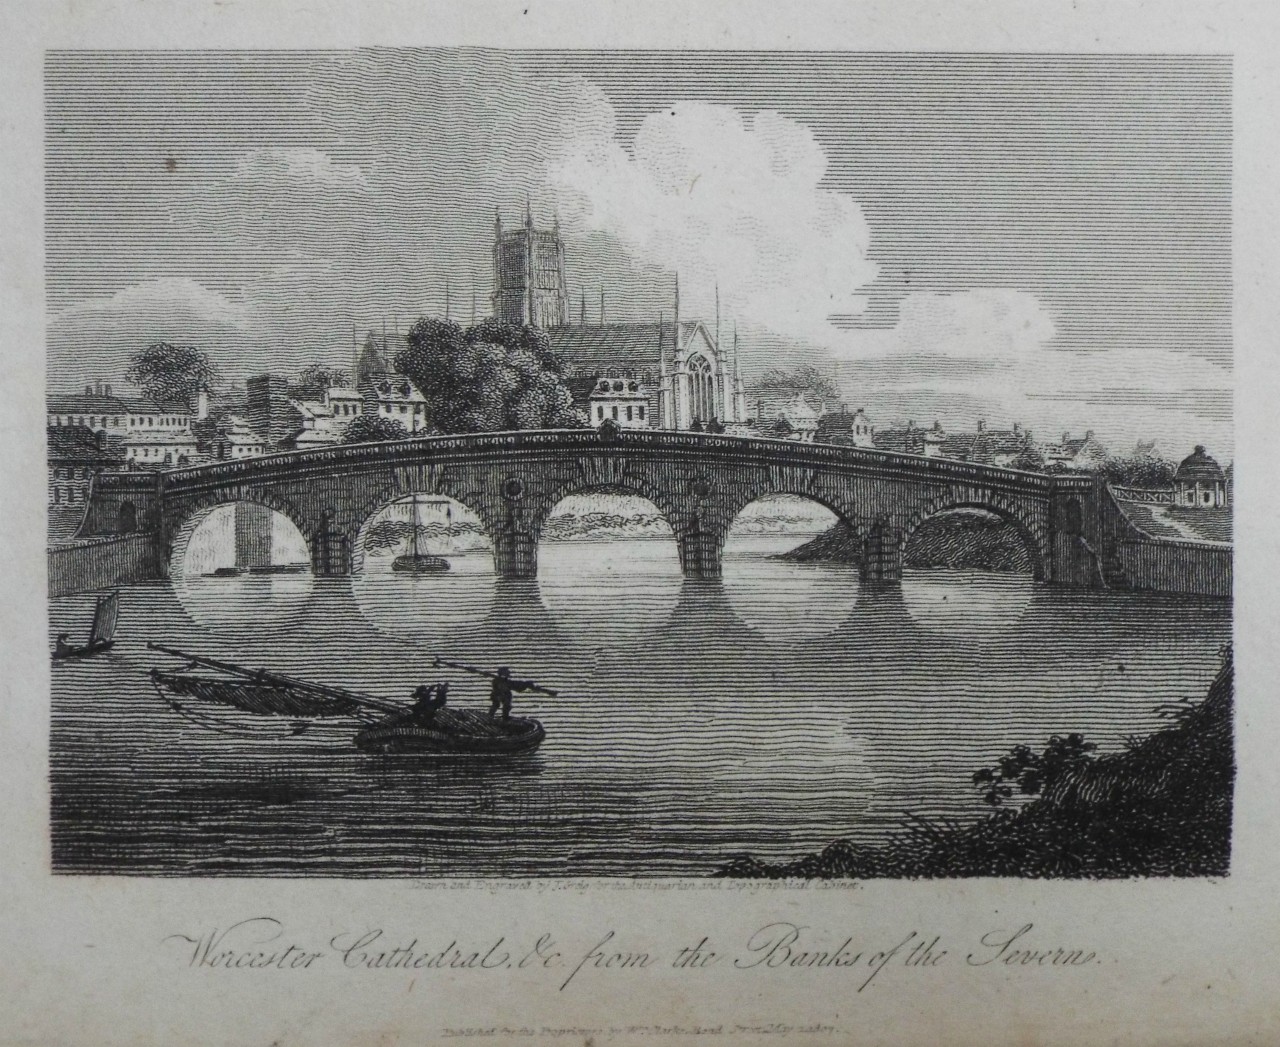 Print - Worcester Cathedral, &.c from the Banks of the Severn. - Greig